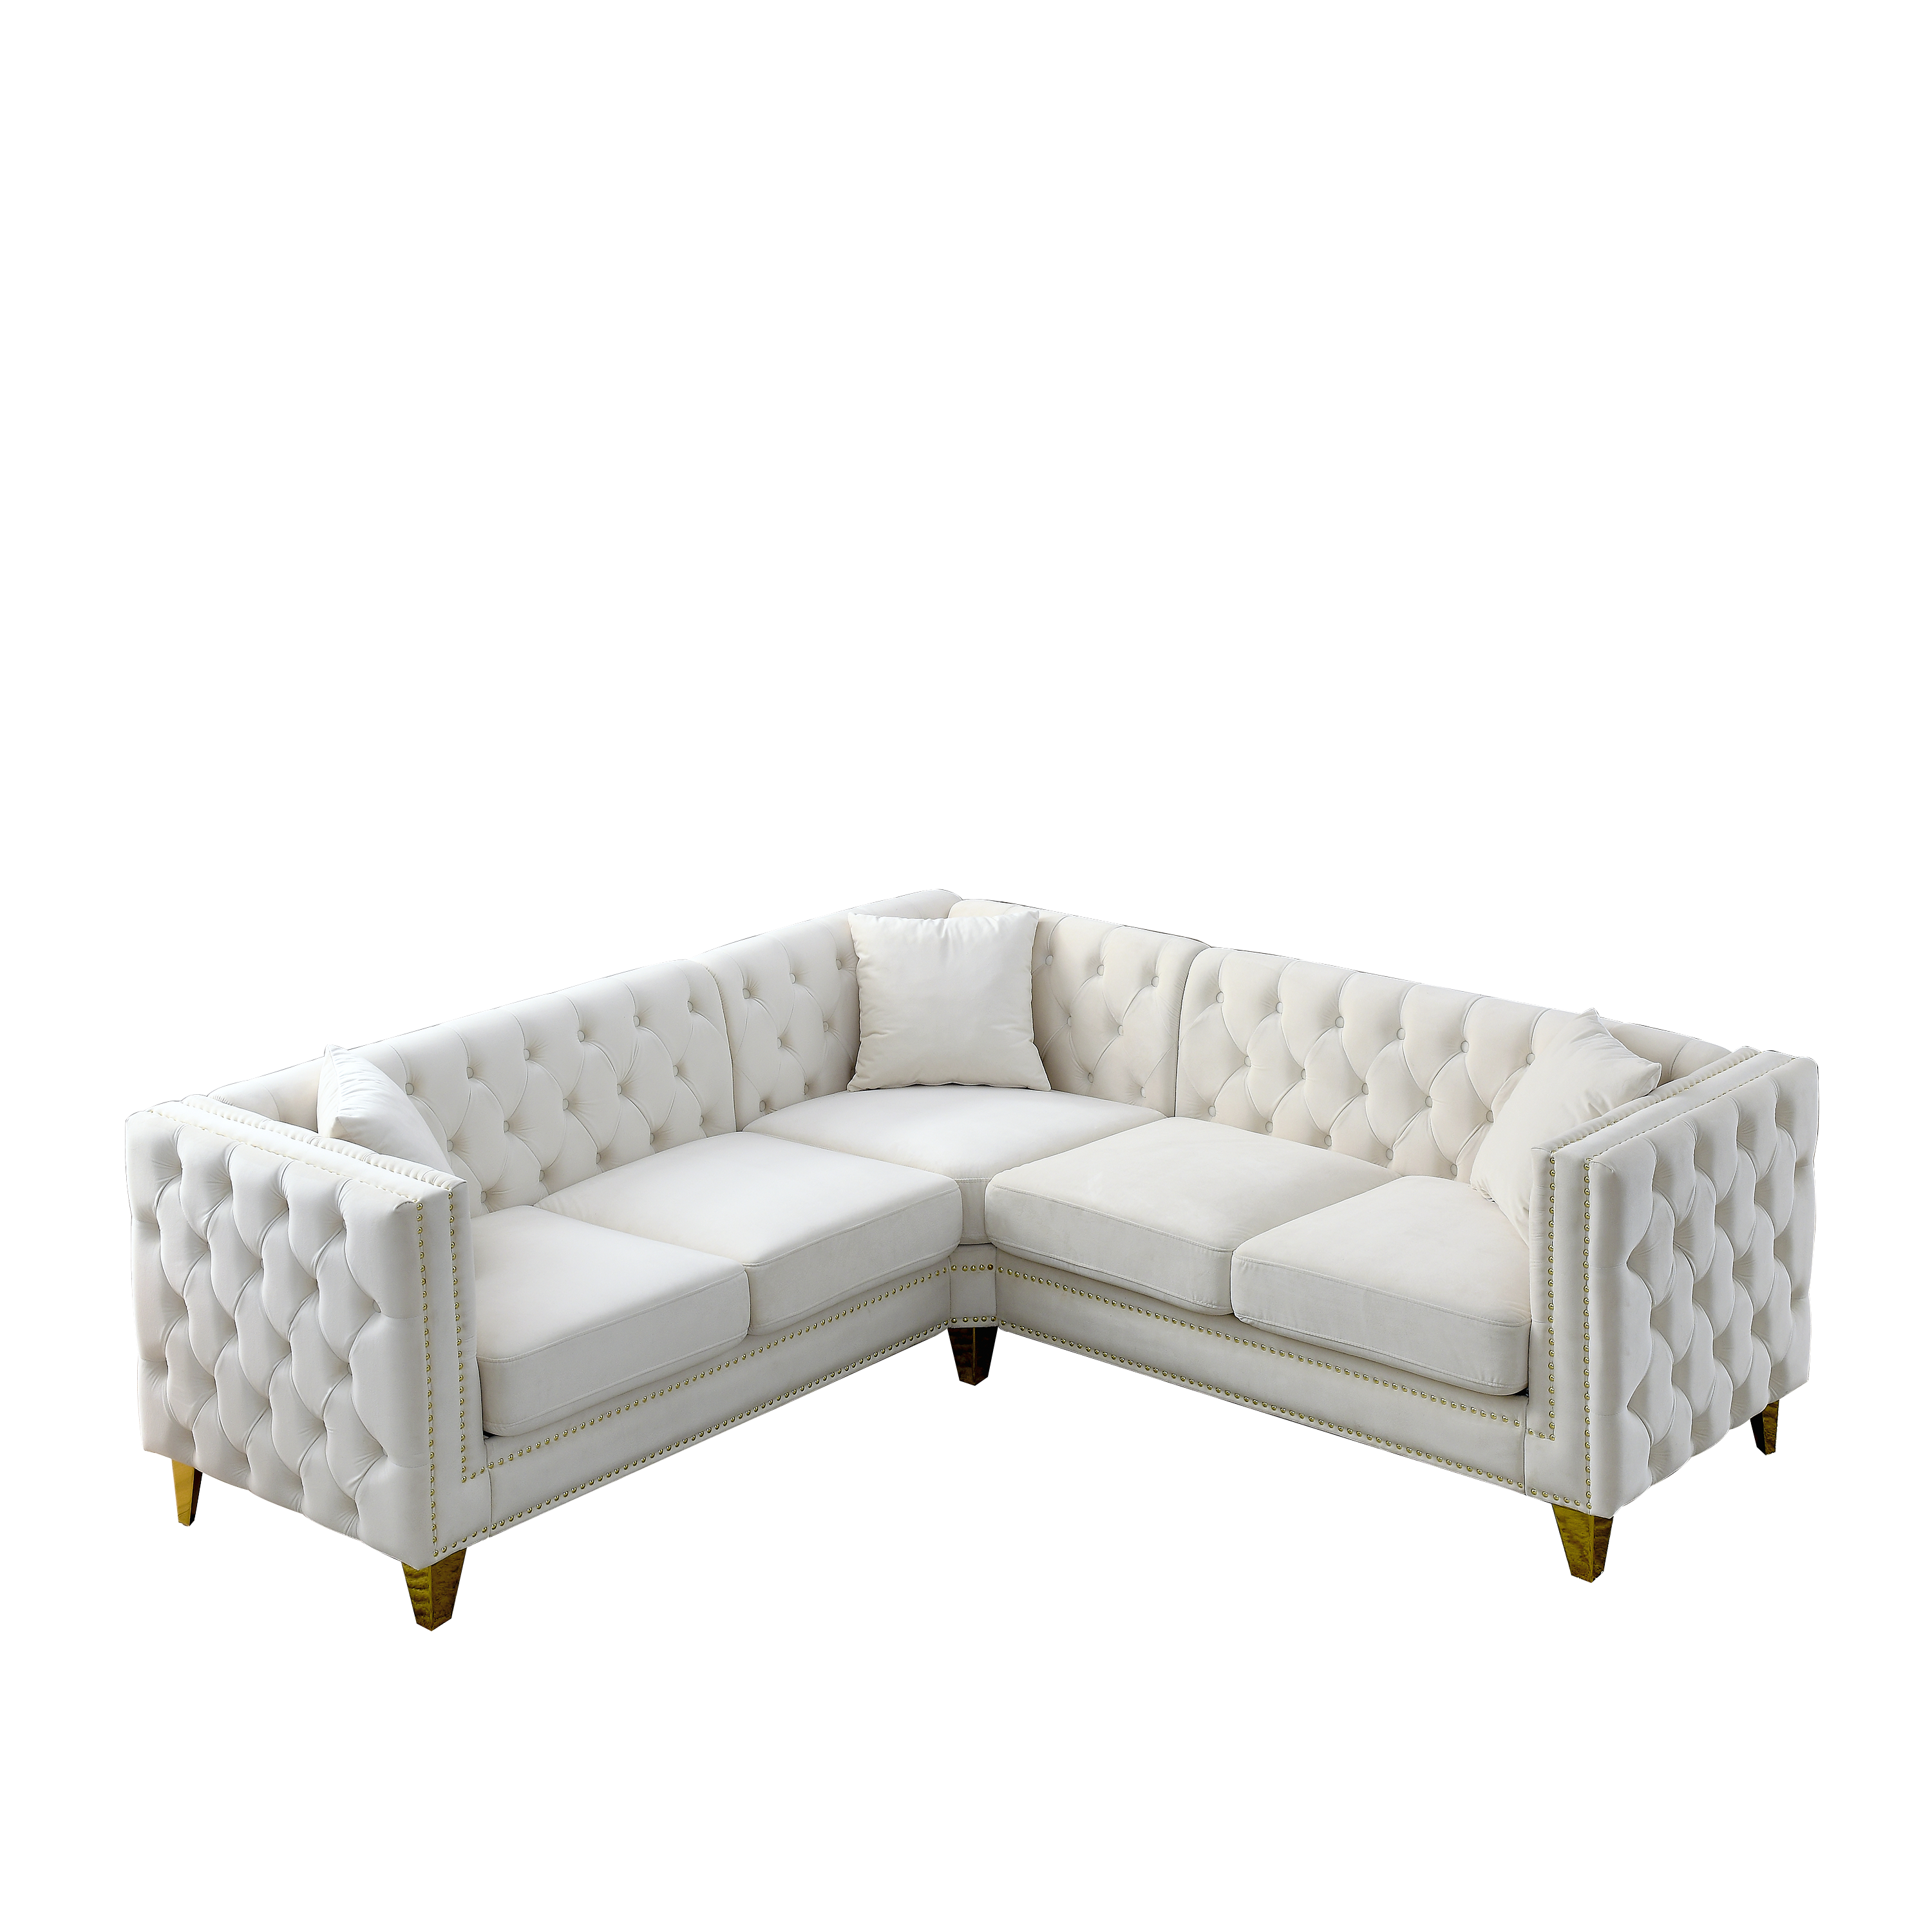 Finley Luxury Velvet L-Shaped Sectional Sofa With Golden Metal Legs and Nailhead Trim